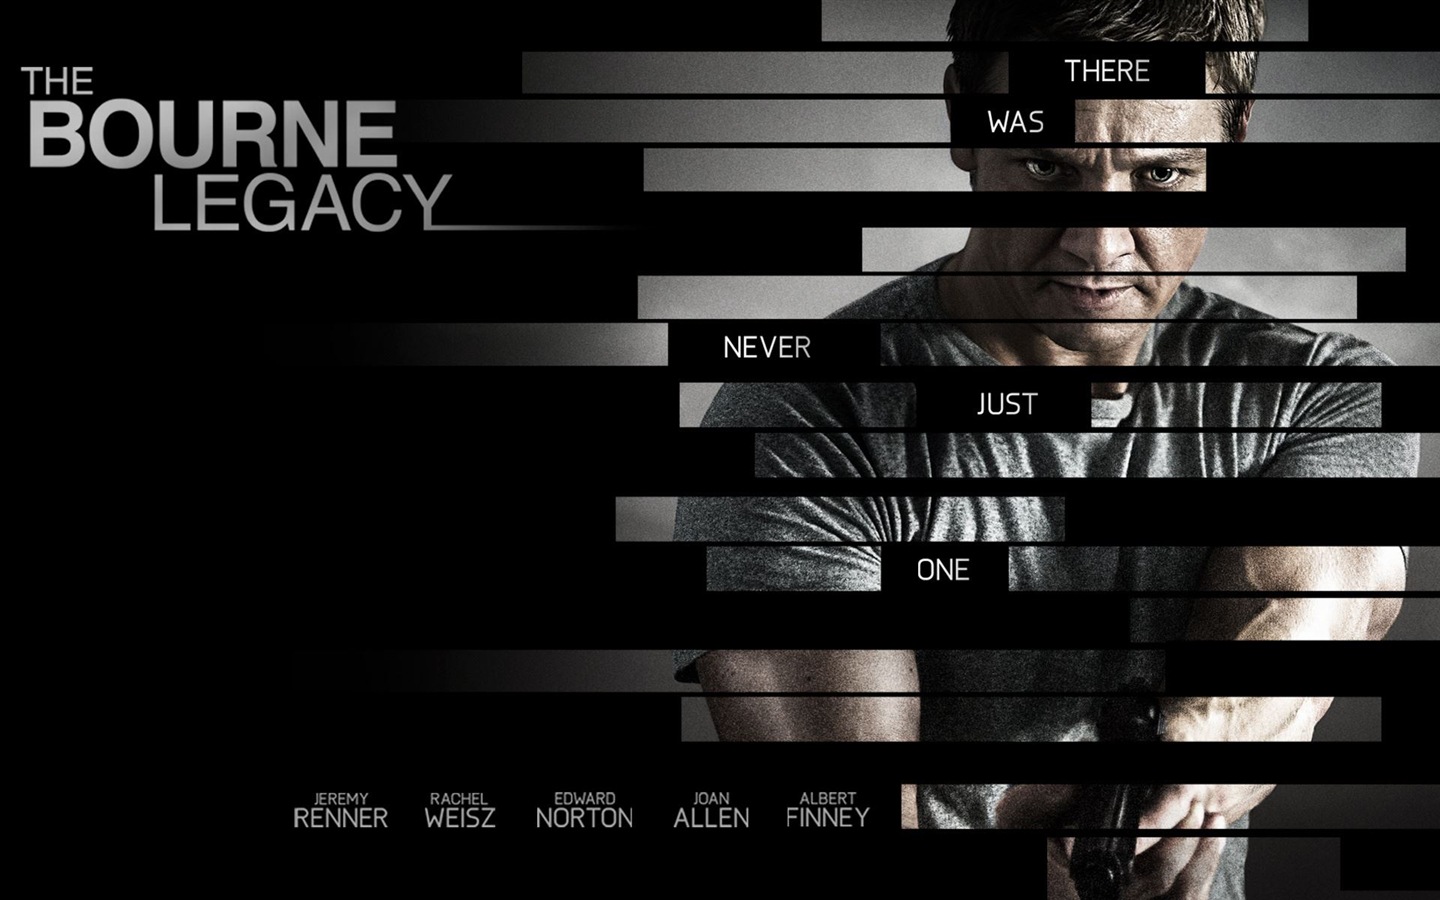 The Bourne Legacy HD wallpapers #17 - 1440x900